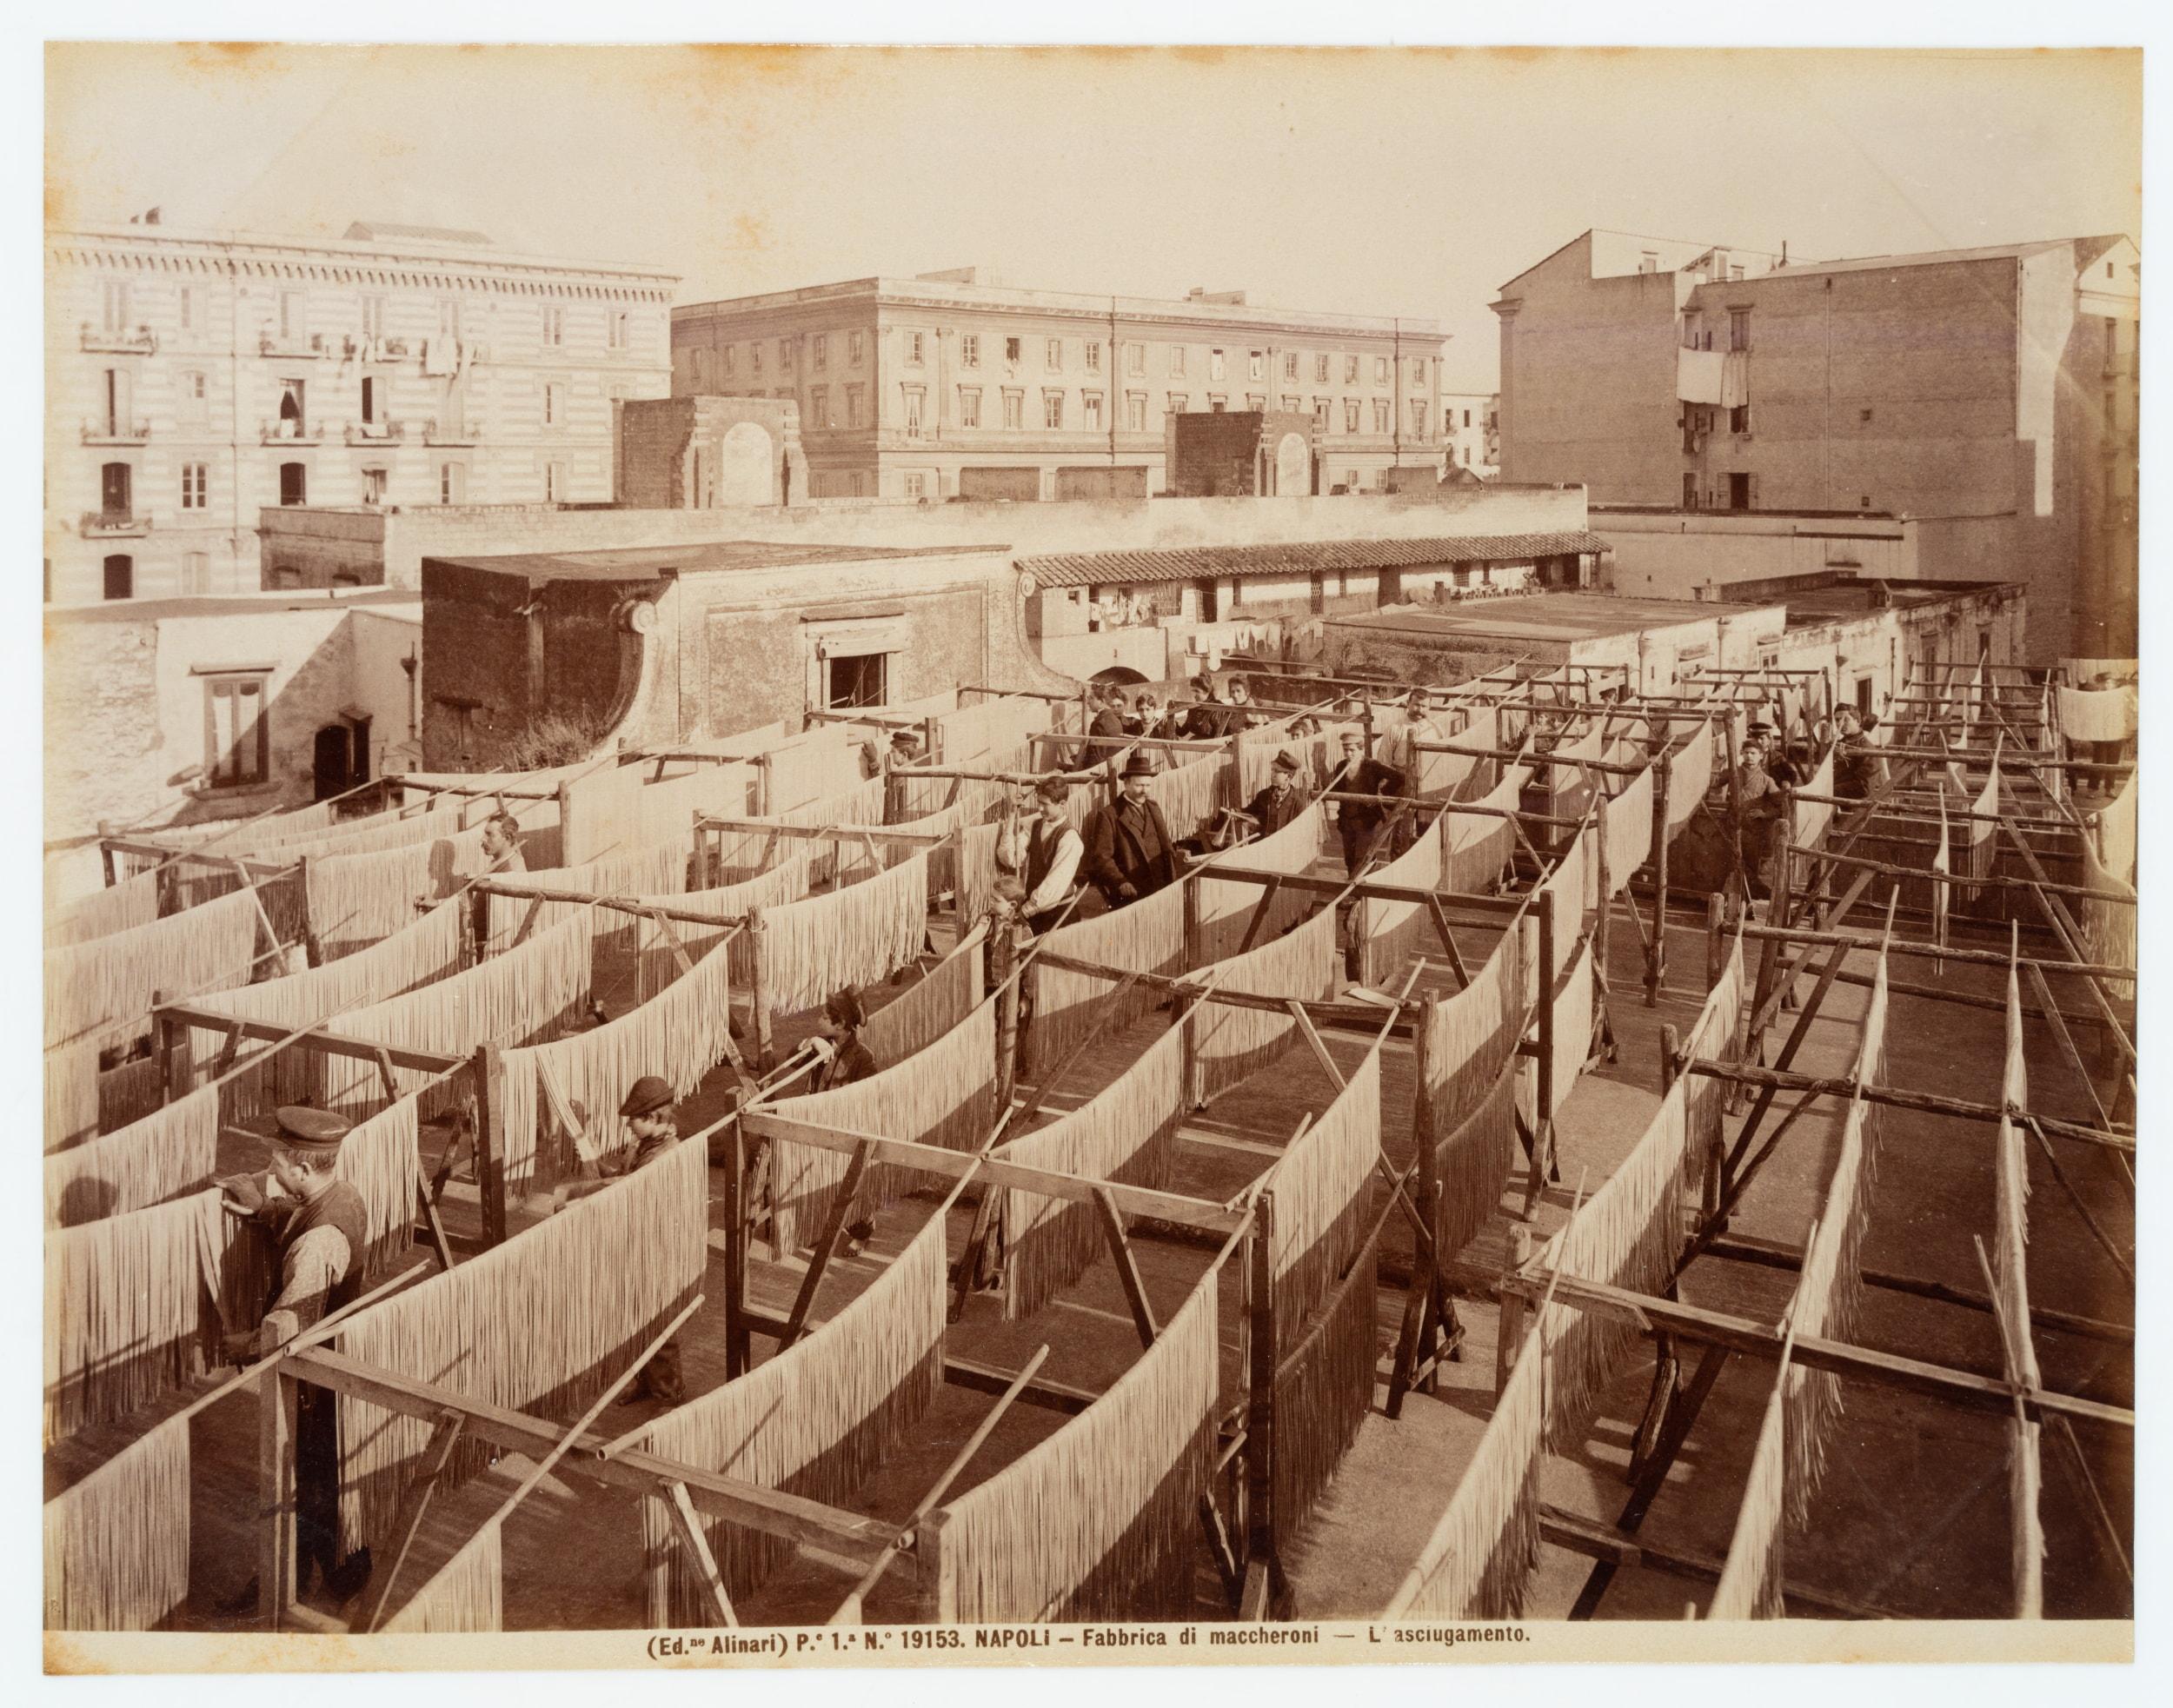 Fratelli Alinari (19th century): Maccheroni factory Insight into pasta production with drying pasta lines in the sun and workers, Naples, c. 1880, albumen paper print

Technique: albumen paper print

Inscription: lower left signed in the printing